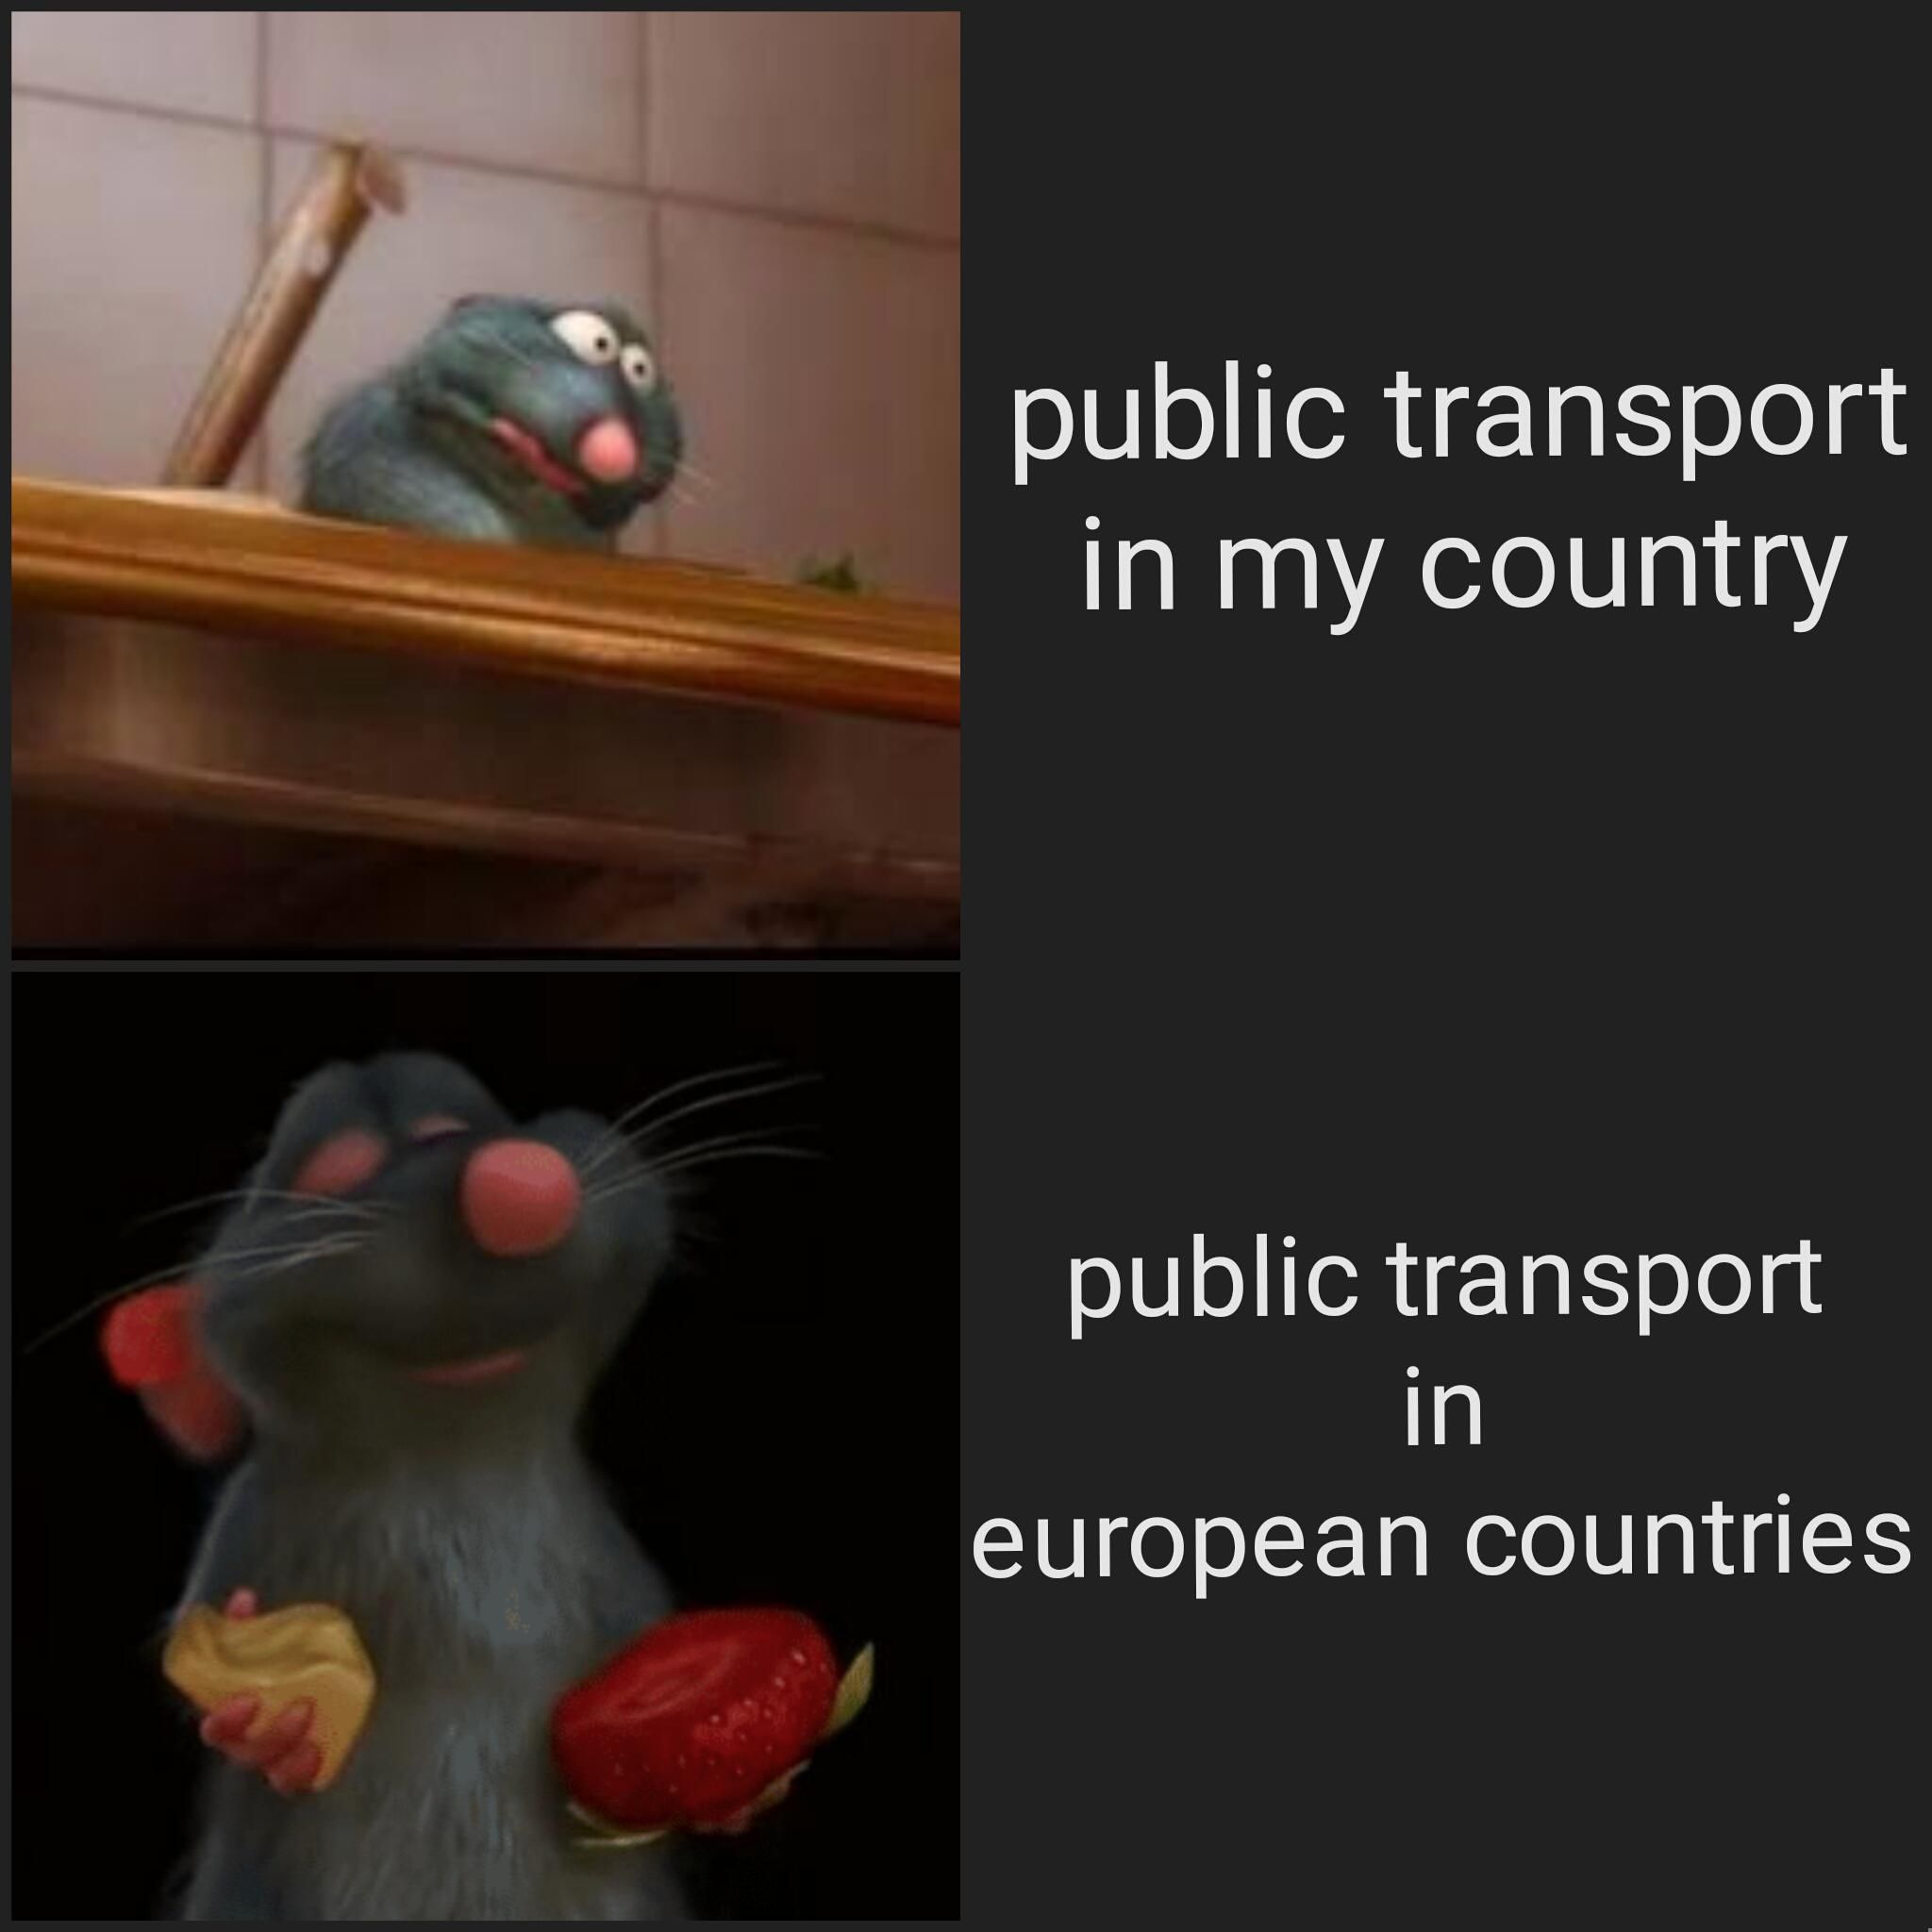 This meme is true because I've been to Europe a bunch of times